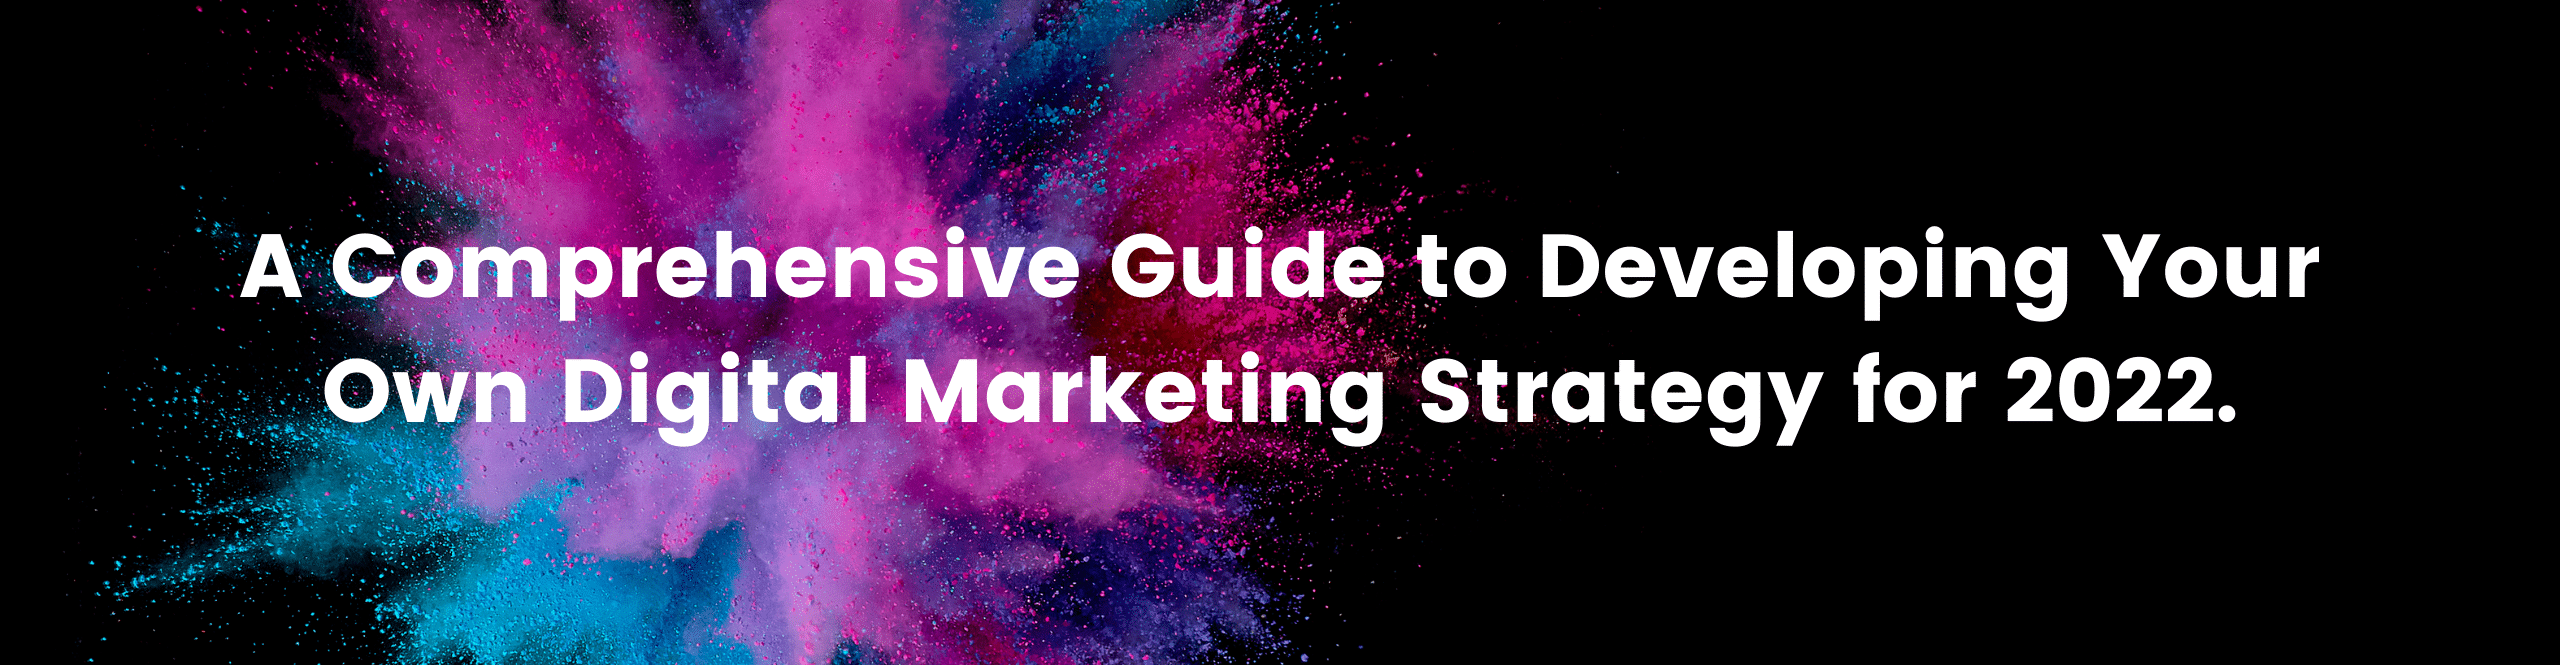 Developing Your Own Digital Marketing Strategy